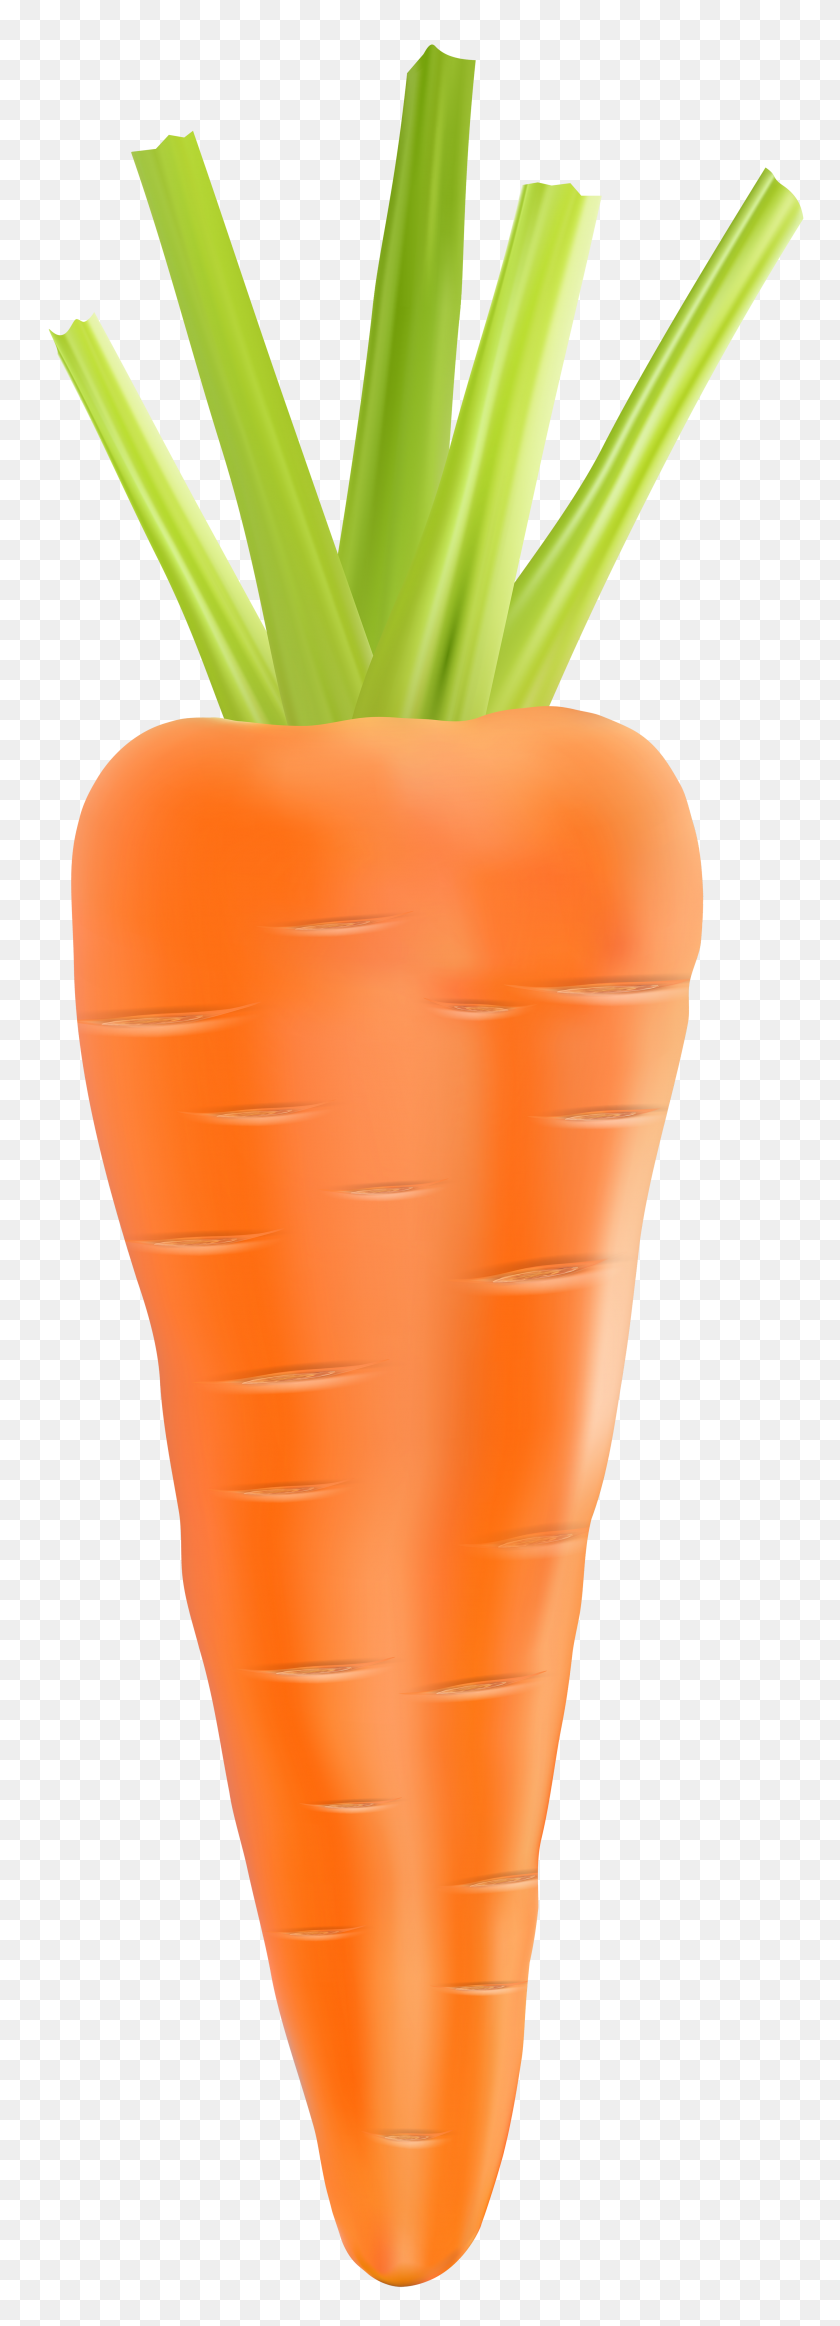 2753x8000 Carrot Clip Art Free Clipart Images - Carrot Nose Clipart